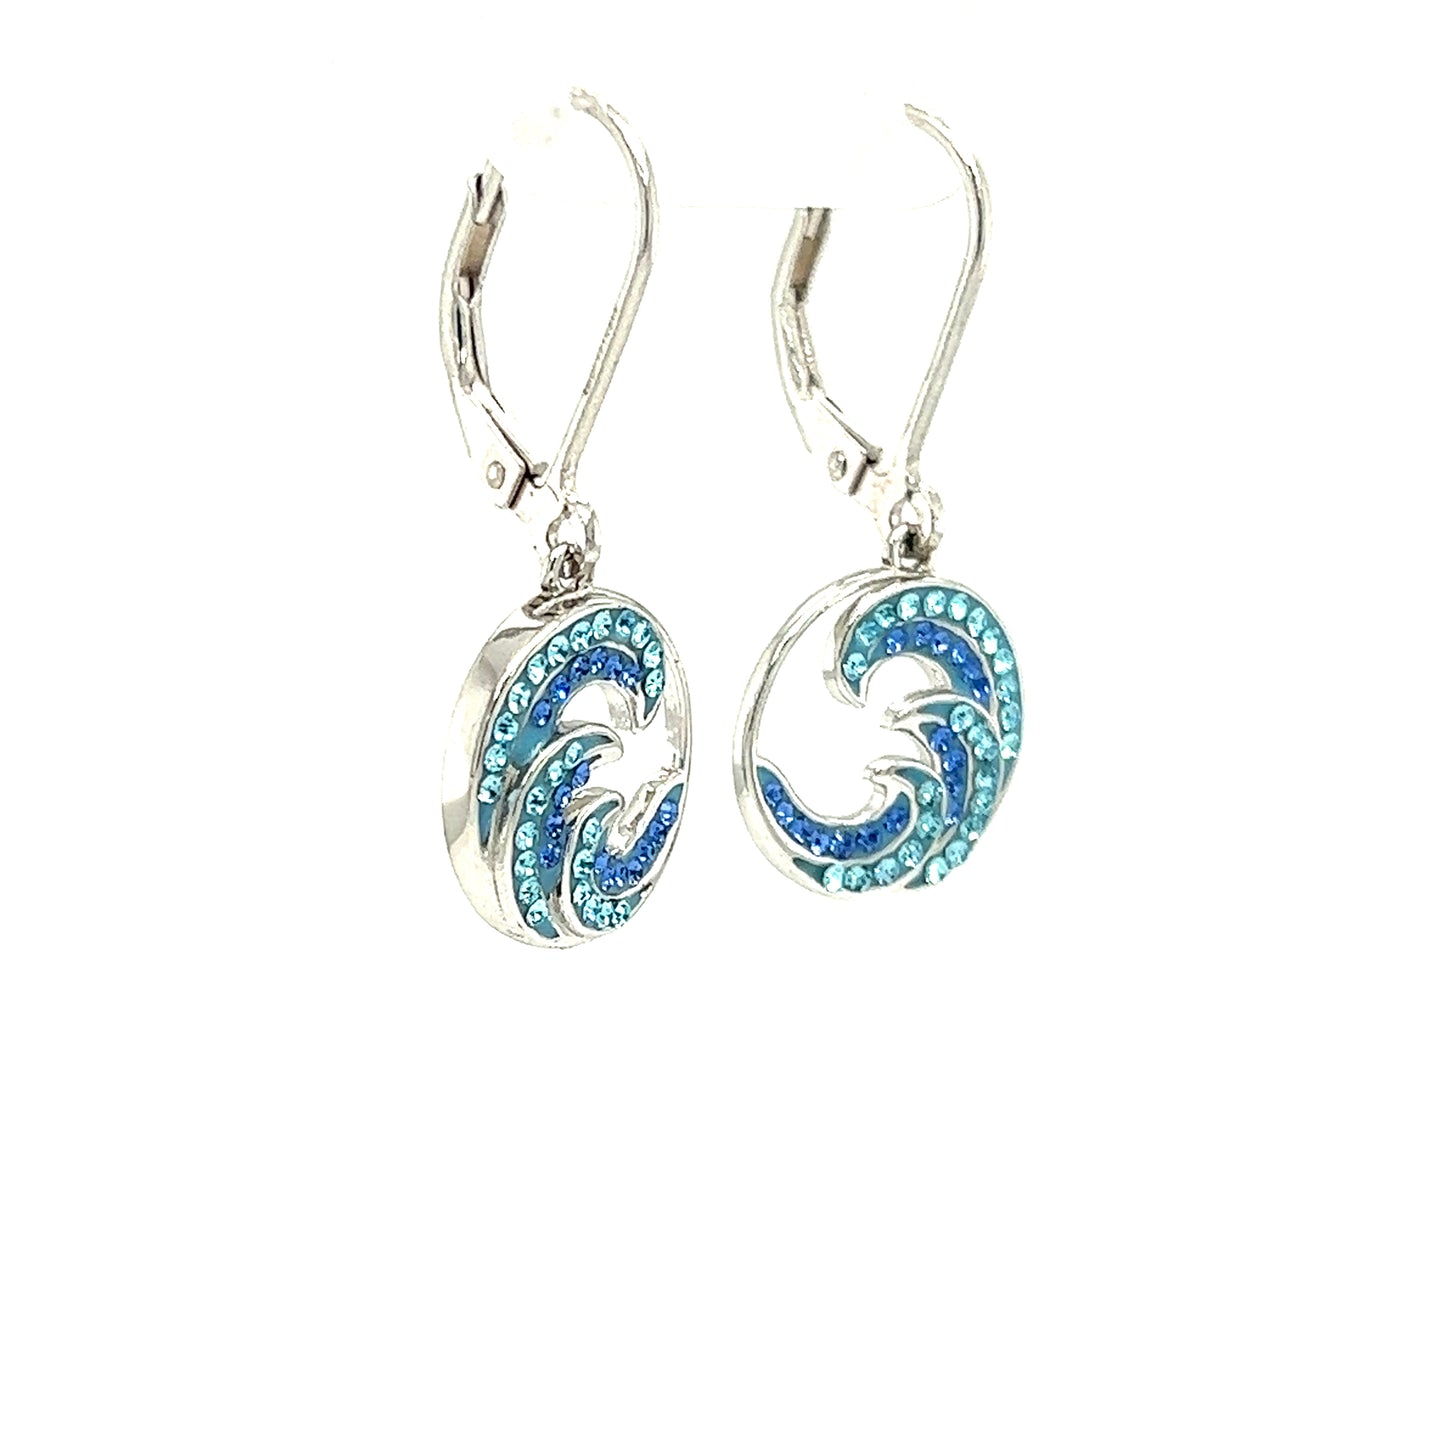 Wave Dangle Earrings with Blue and Aqua Crystals in Sterling Silver Left Side View